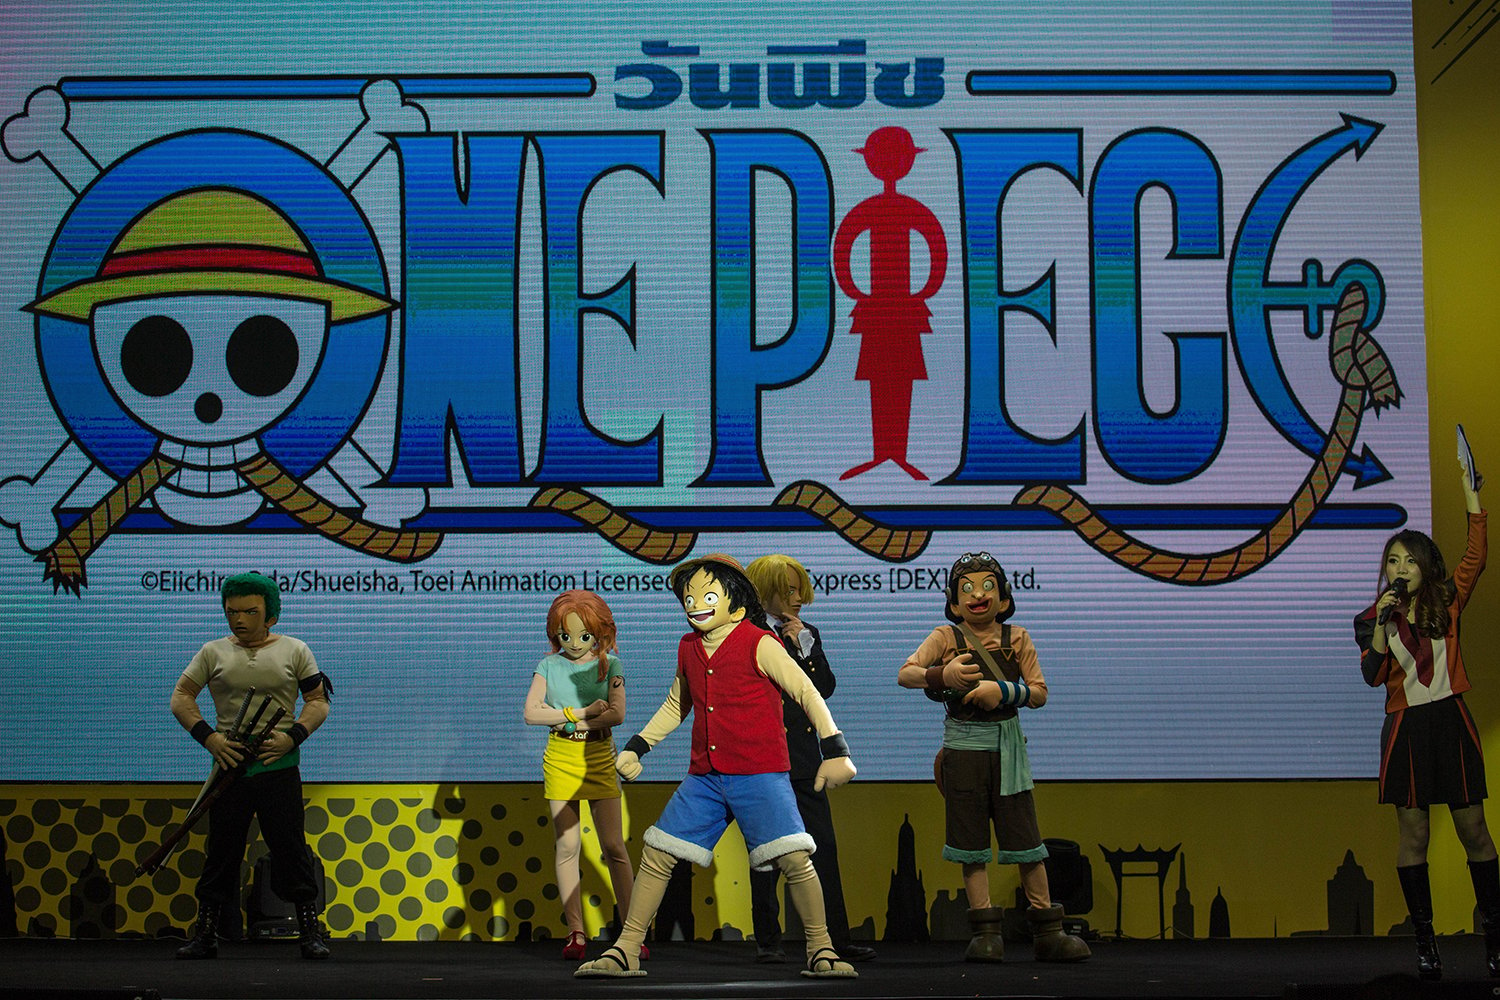 One Piece cosplayers at the Bangkok Comic Con 2016 Festival